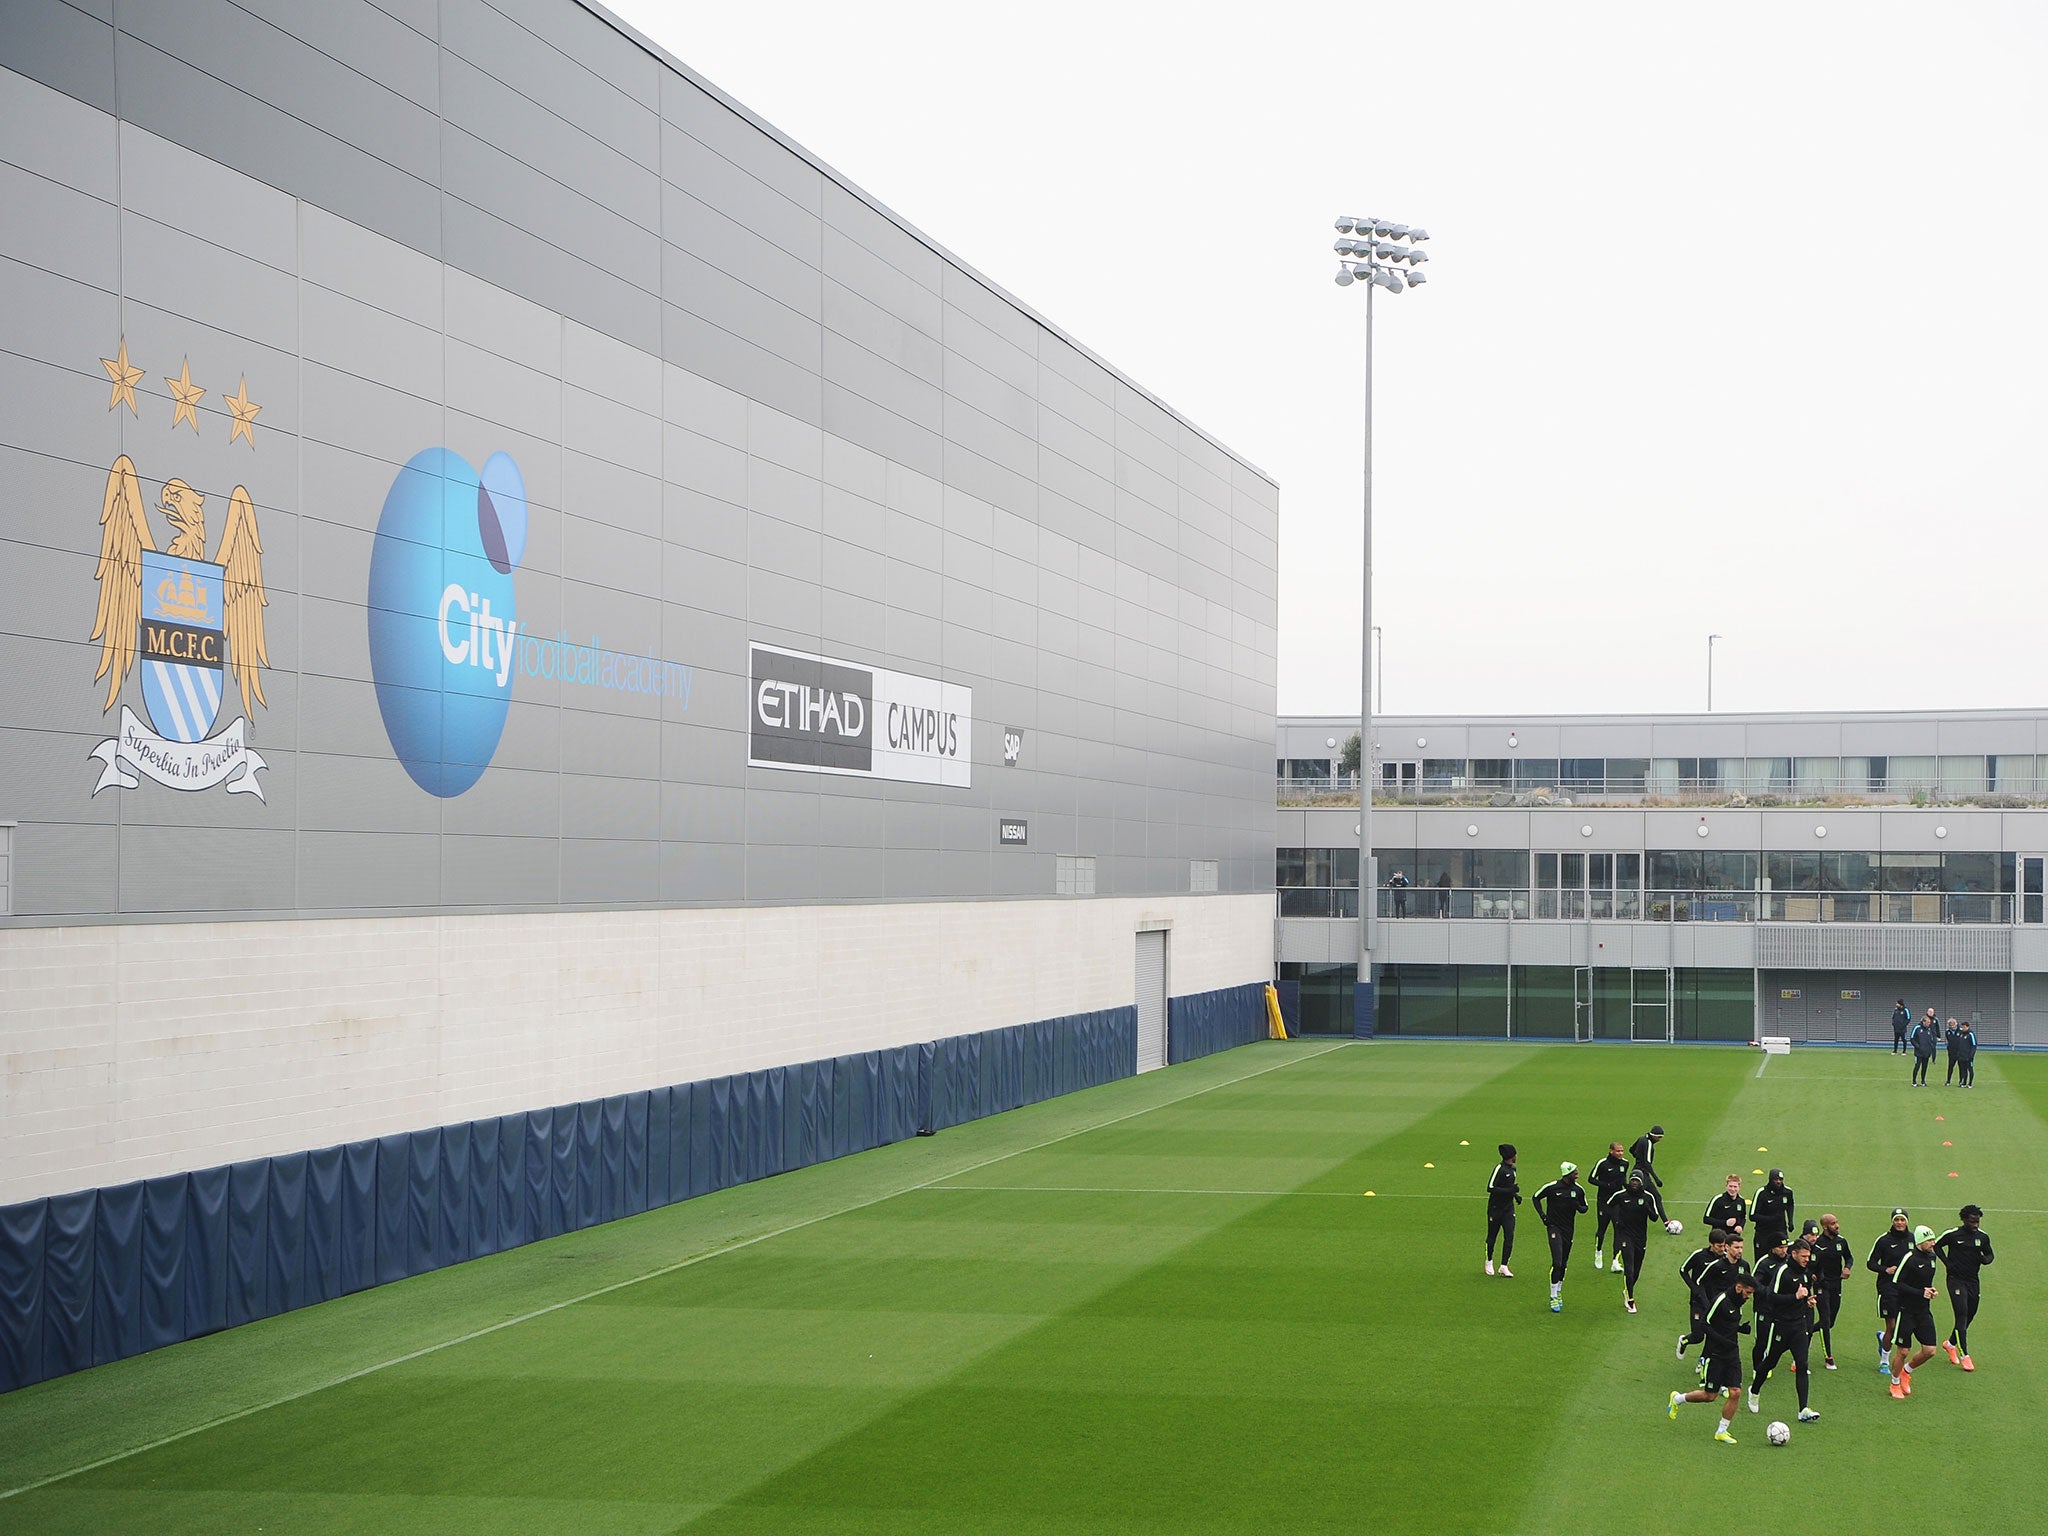 Manchester City boast one of the word's leading football Academies